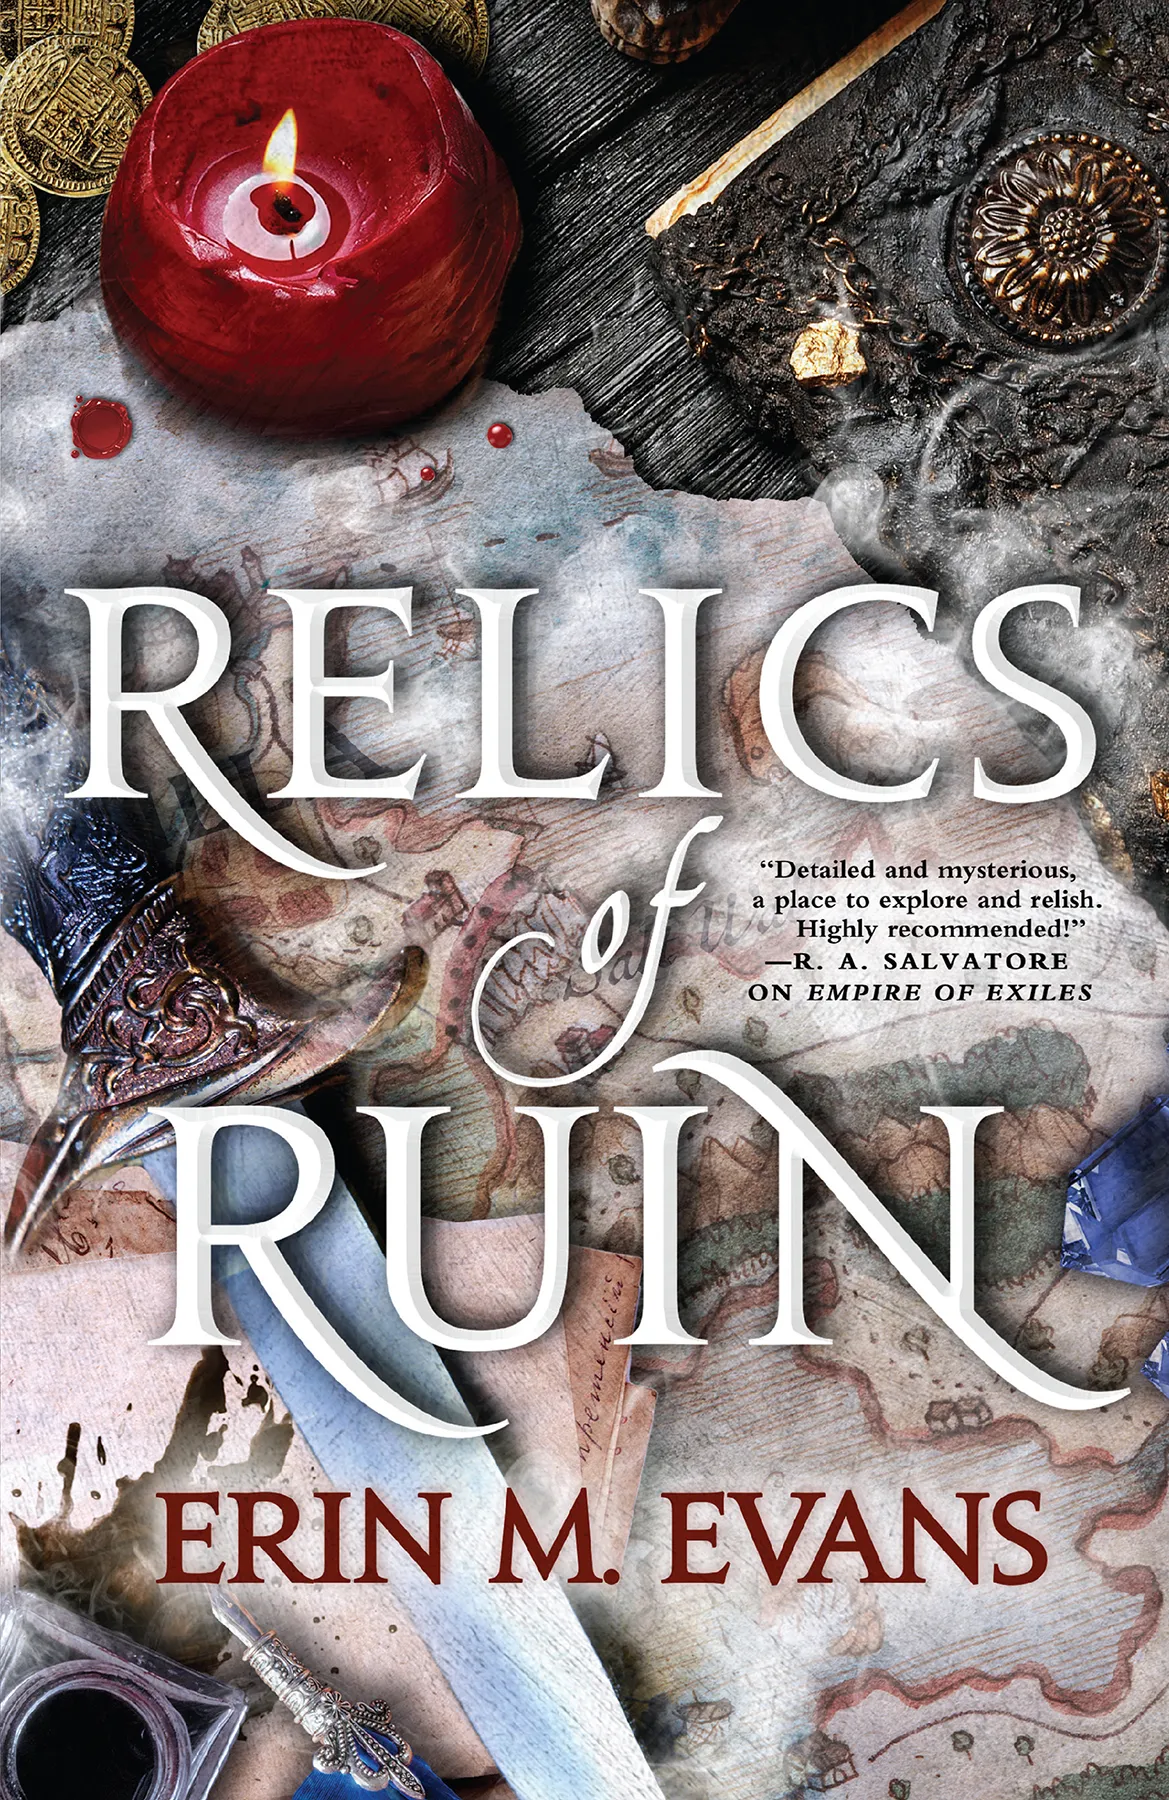 Relics of Ruin (Books of the Usurper #2)